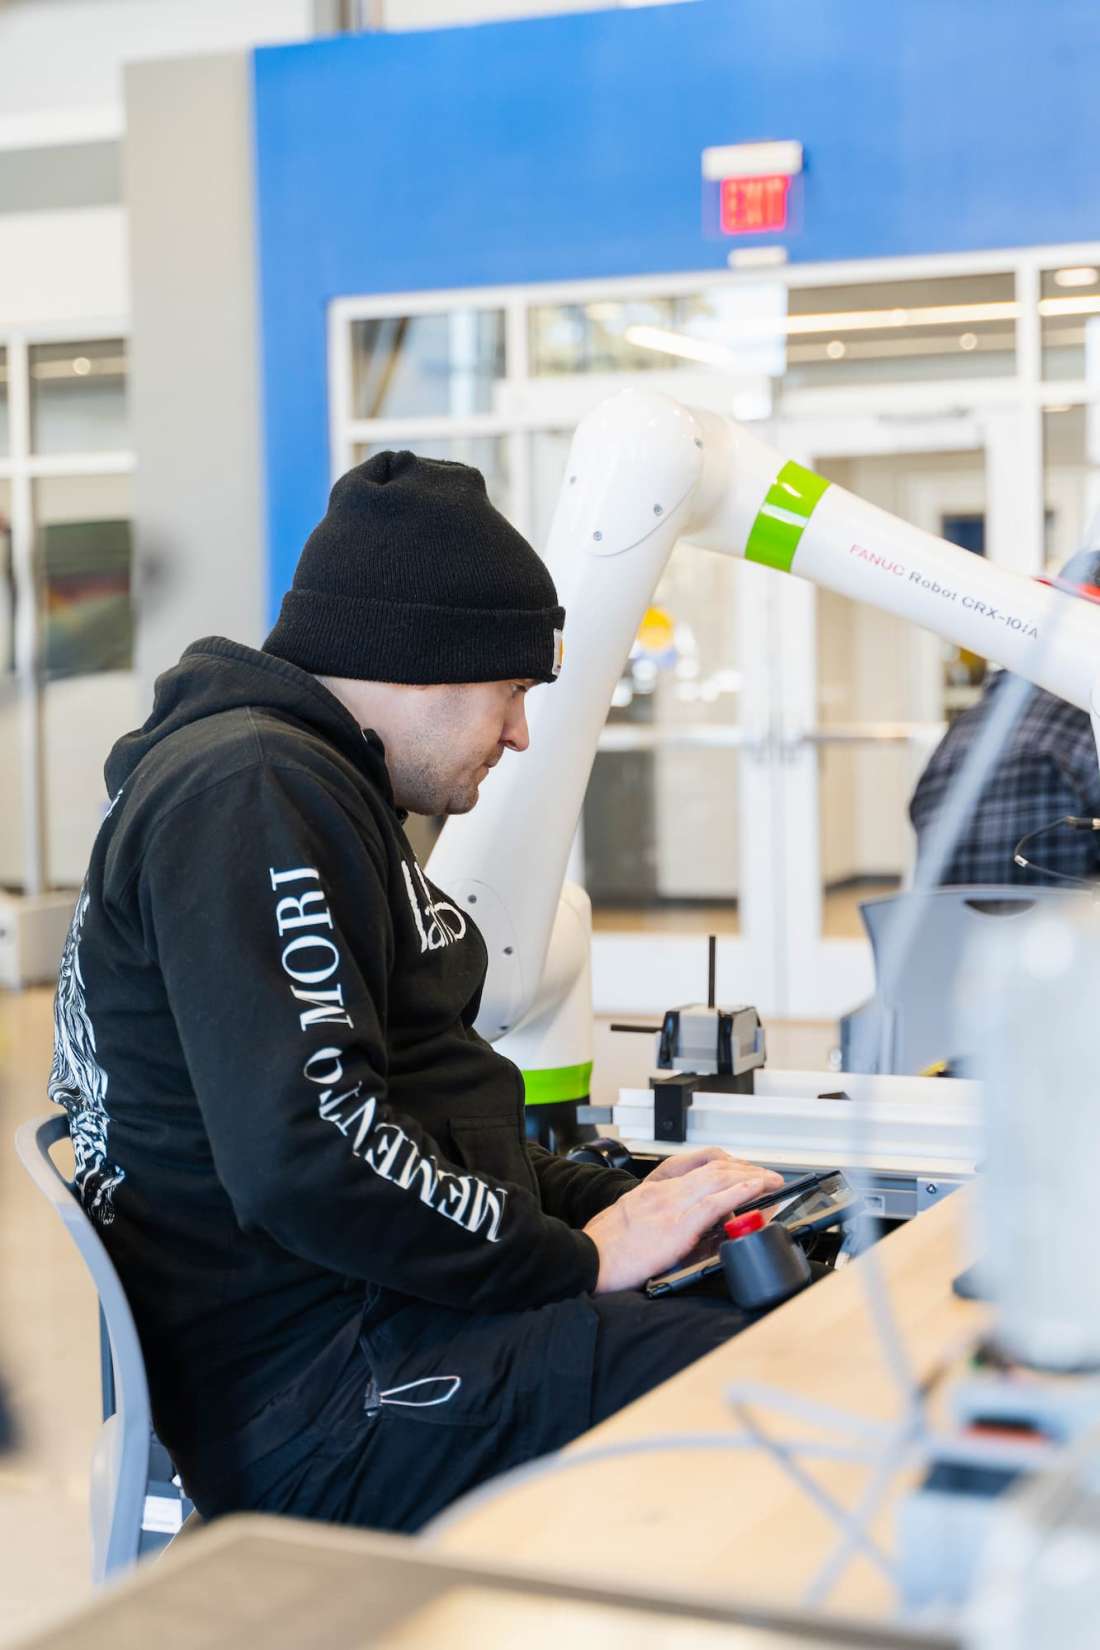 Profile view of a student wearing a black hat and hoodie, watching the operations of an industrial robot.